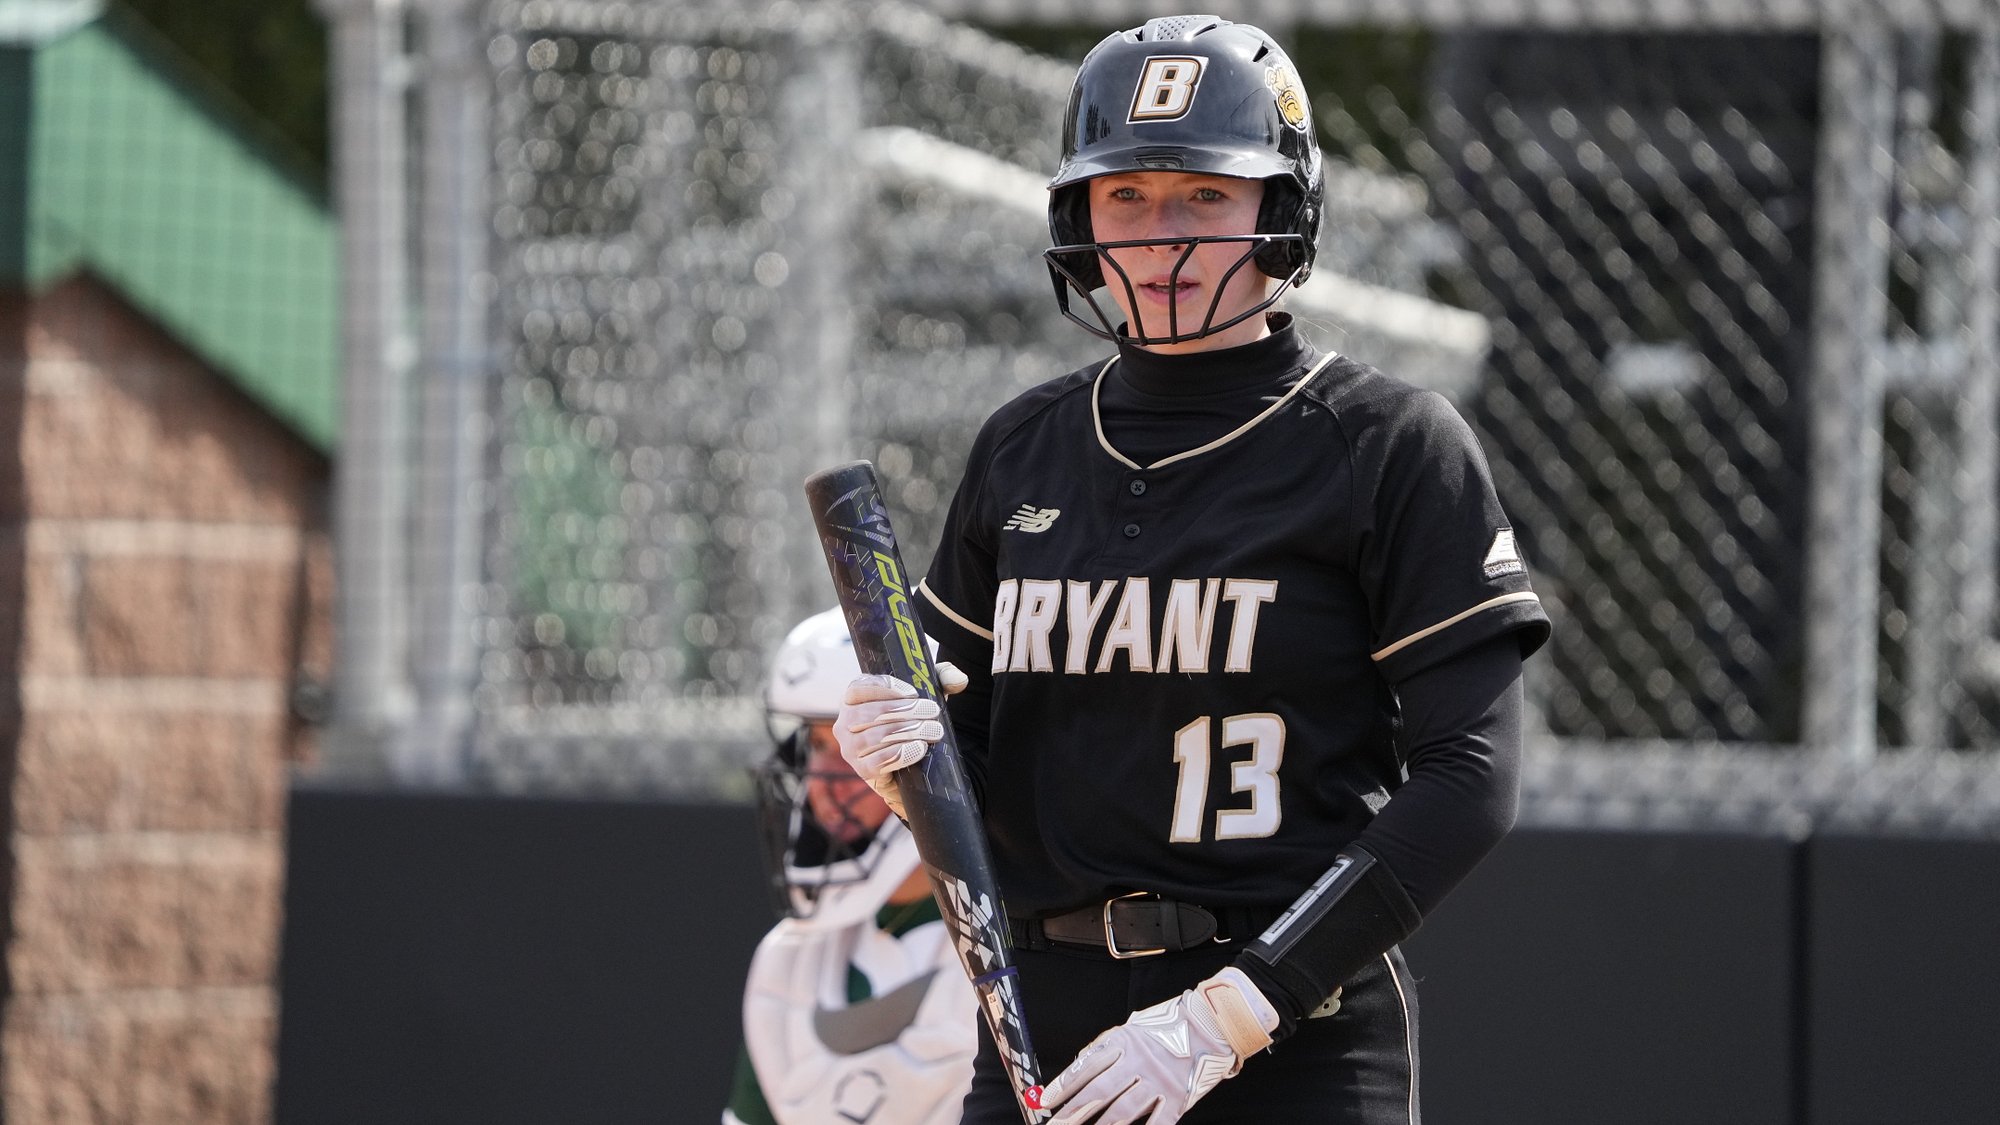 Bryant to face UML at Conaty Park for weekend series